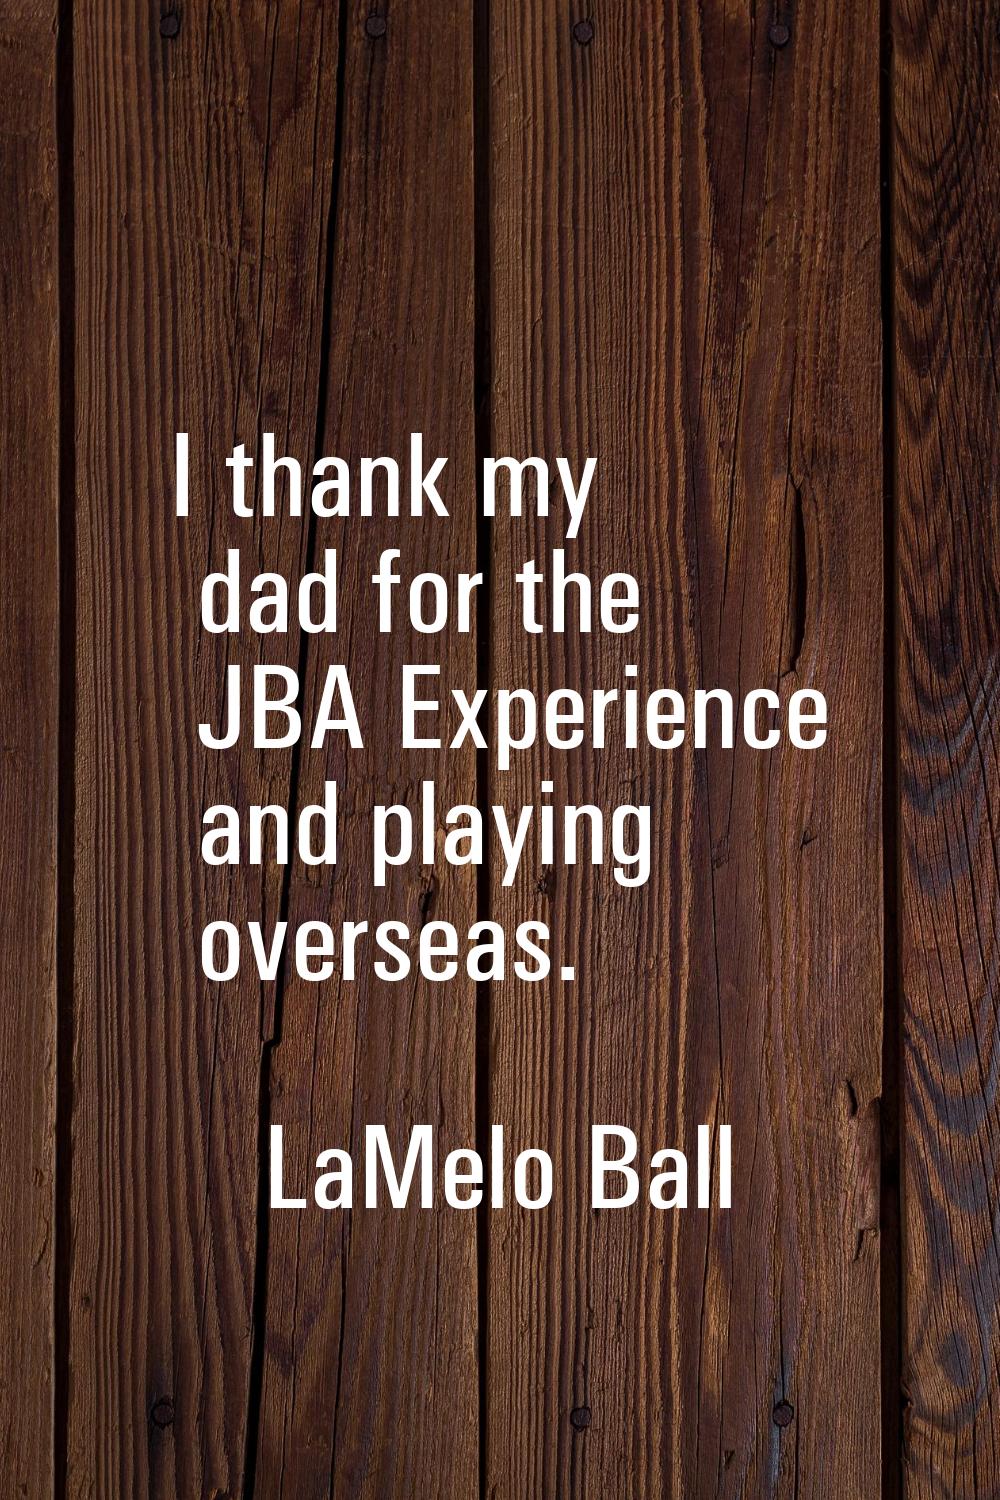 I thank my dad for the JBA Experience and playing overseas.